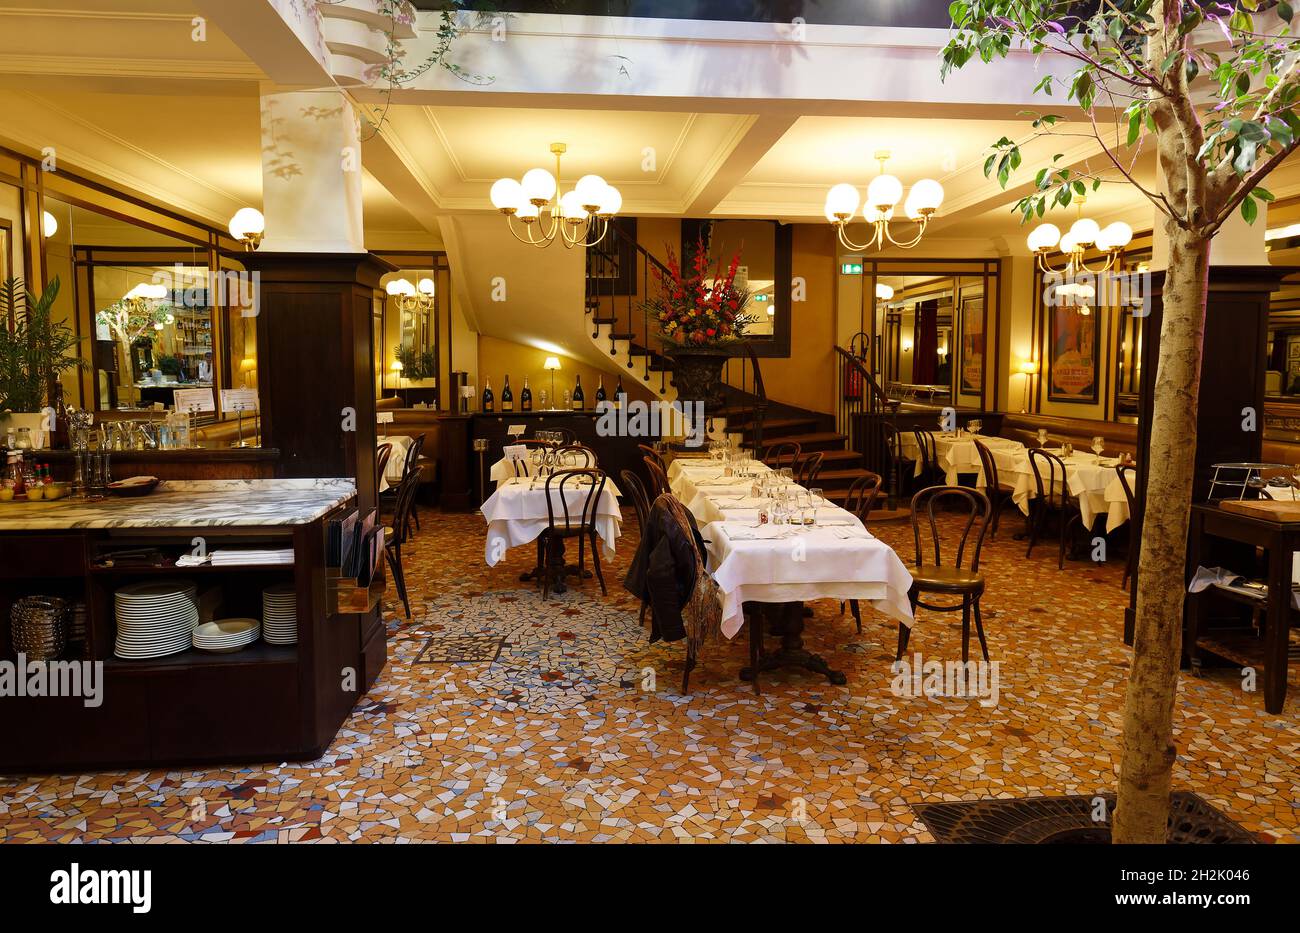 Paris, France-October 19, 2021 : Established in 1921, Le Cafe du Commerce is large luxury brasserie, located in one of the liveliest streets of 15th d Stock Photo